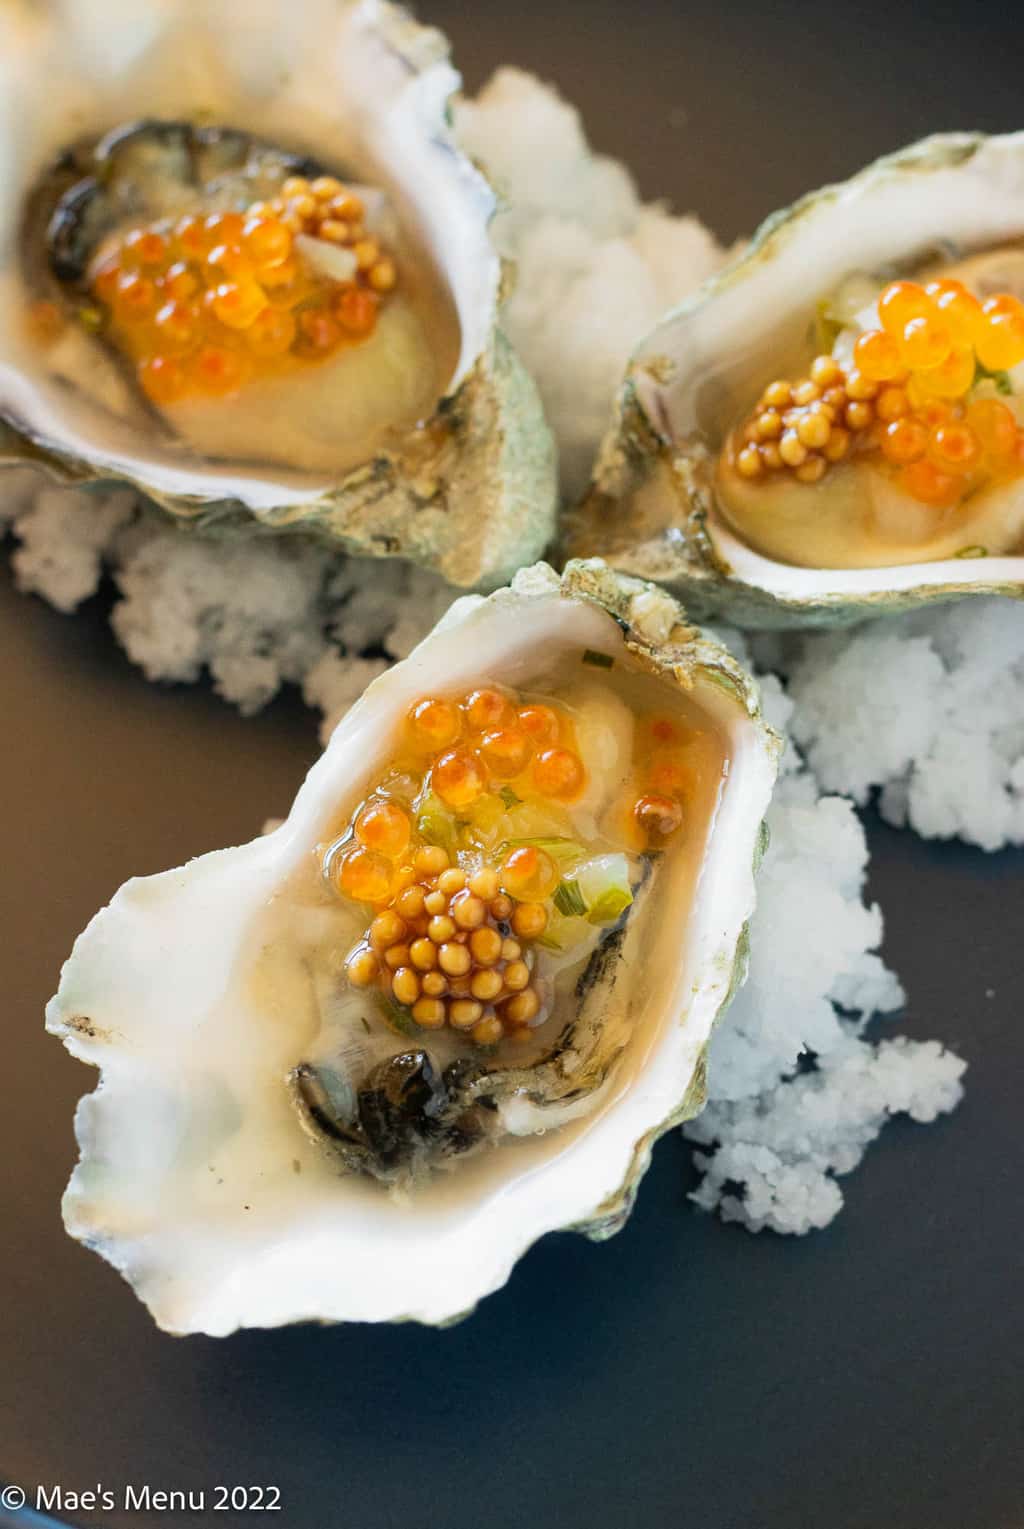 An up-close shot of 3 oysters with caviar and mustard seed.